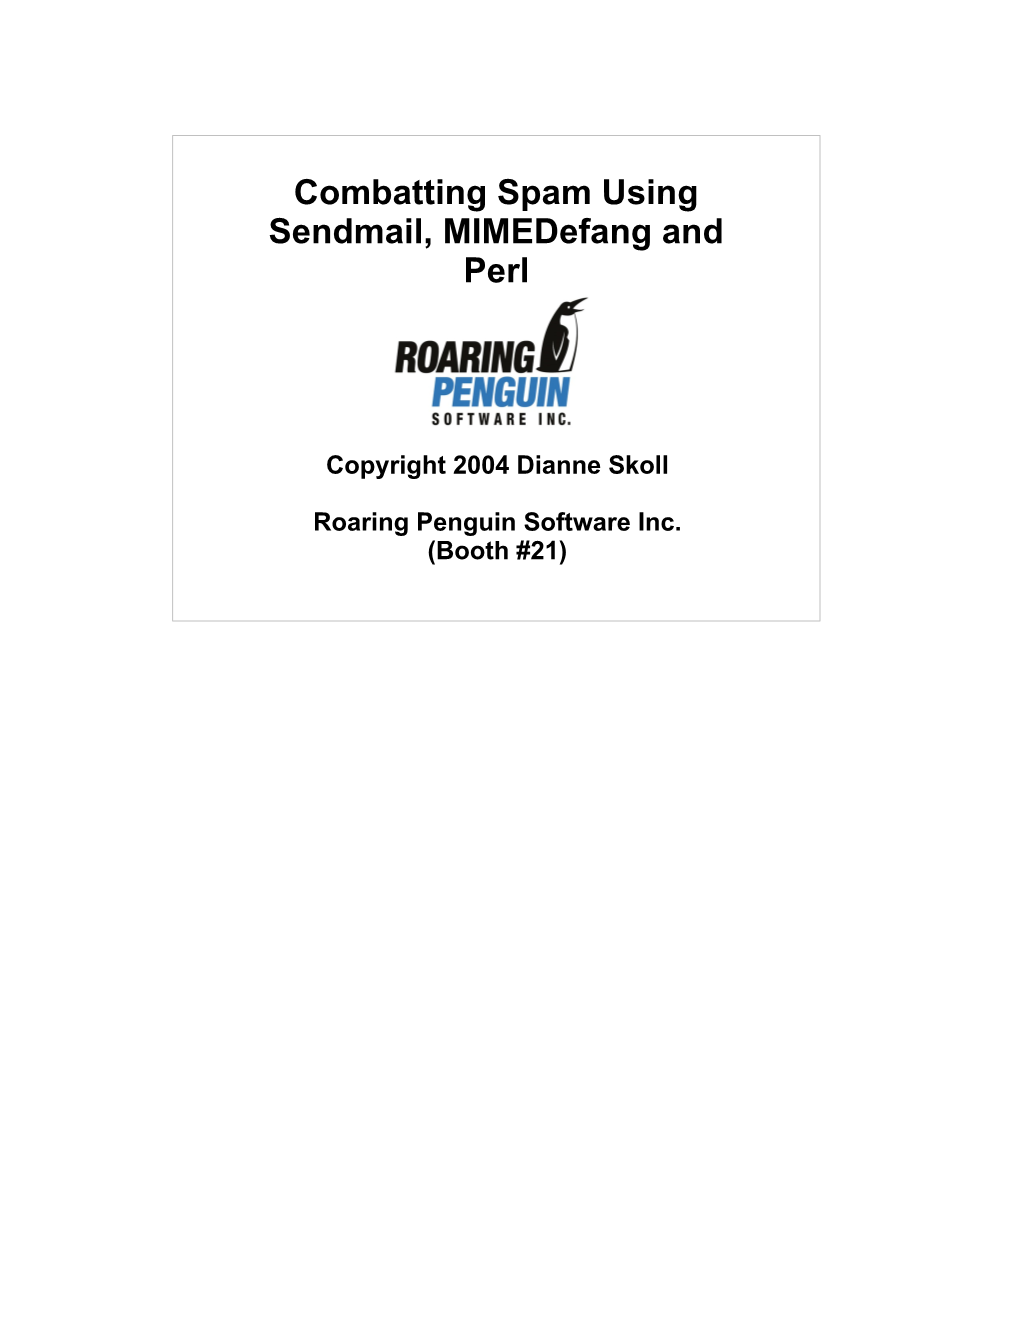 Combatting Spam Using Sendmail, Mimedefang and Perl